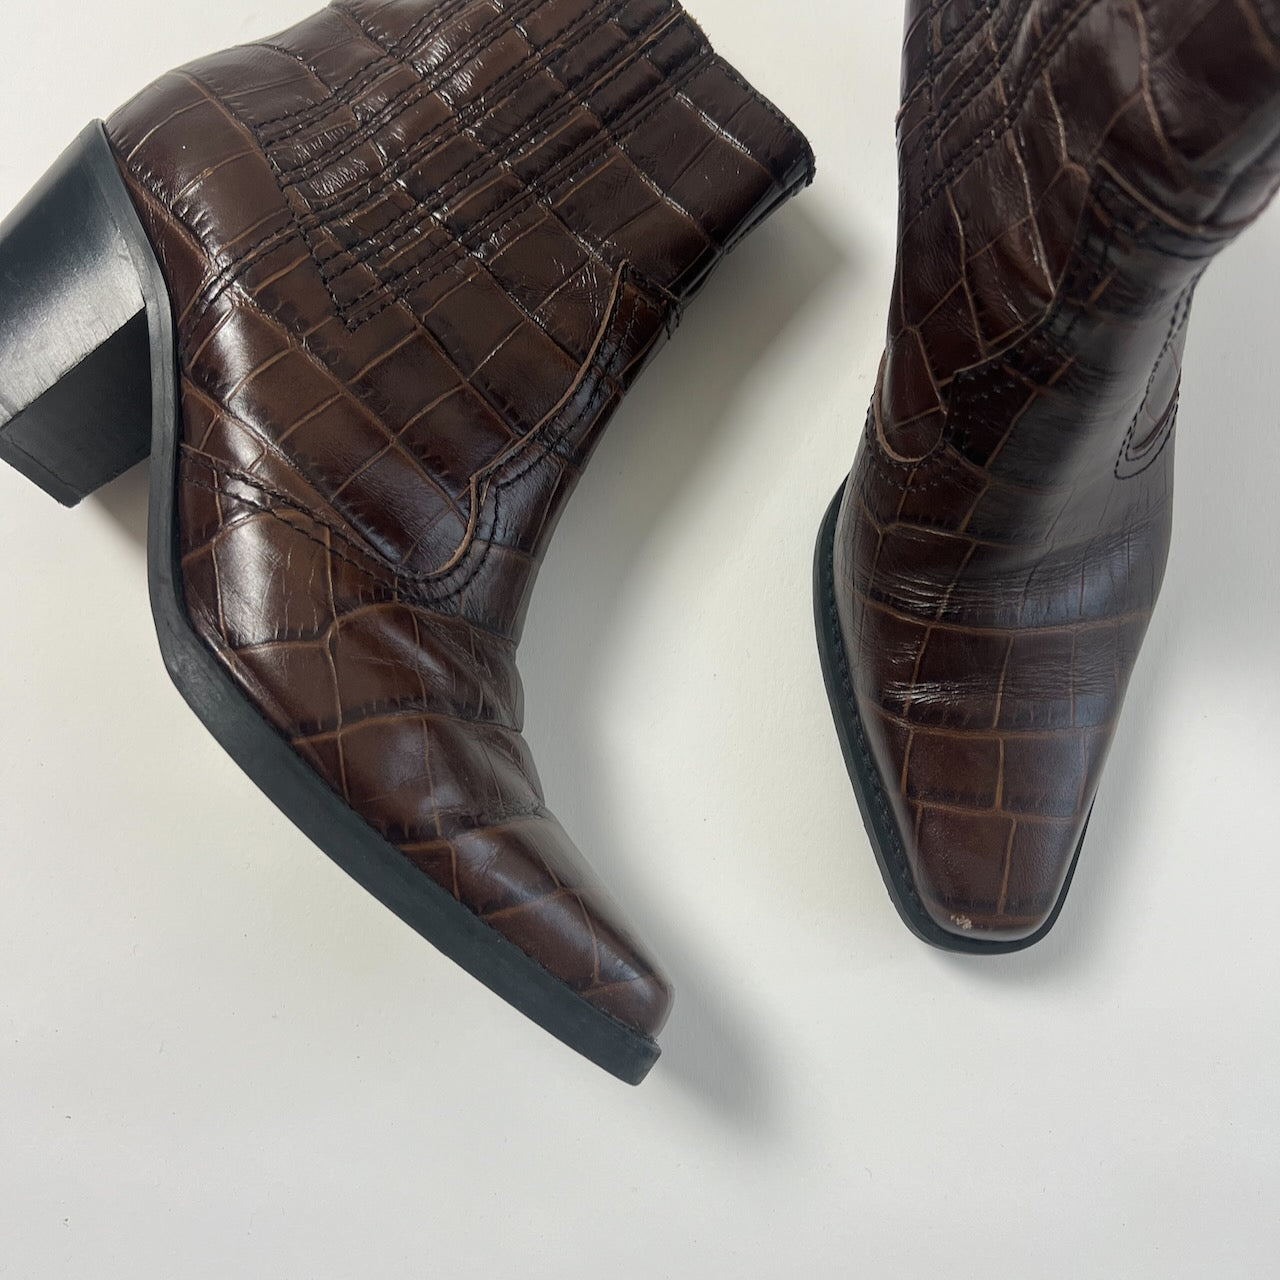 Ganni croc-embossed brown leather western ankle boots